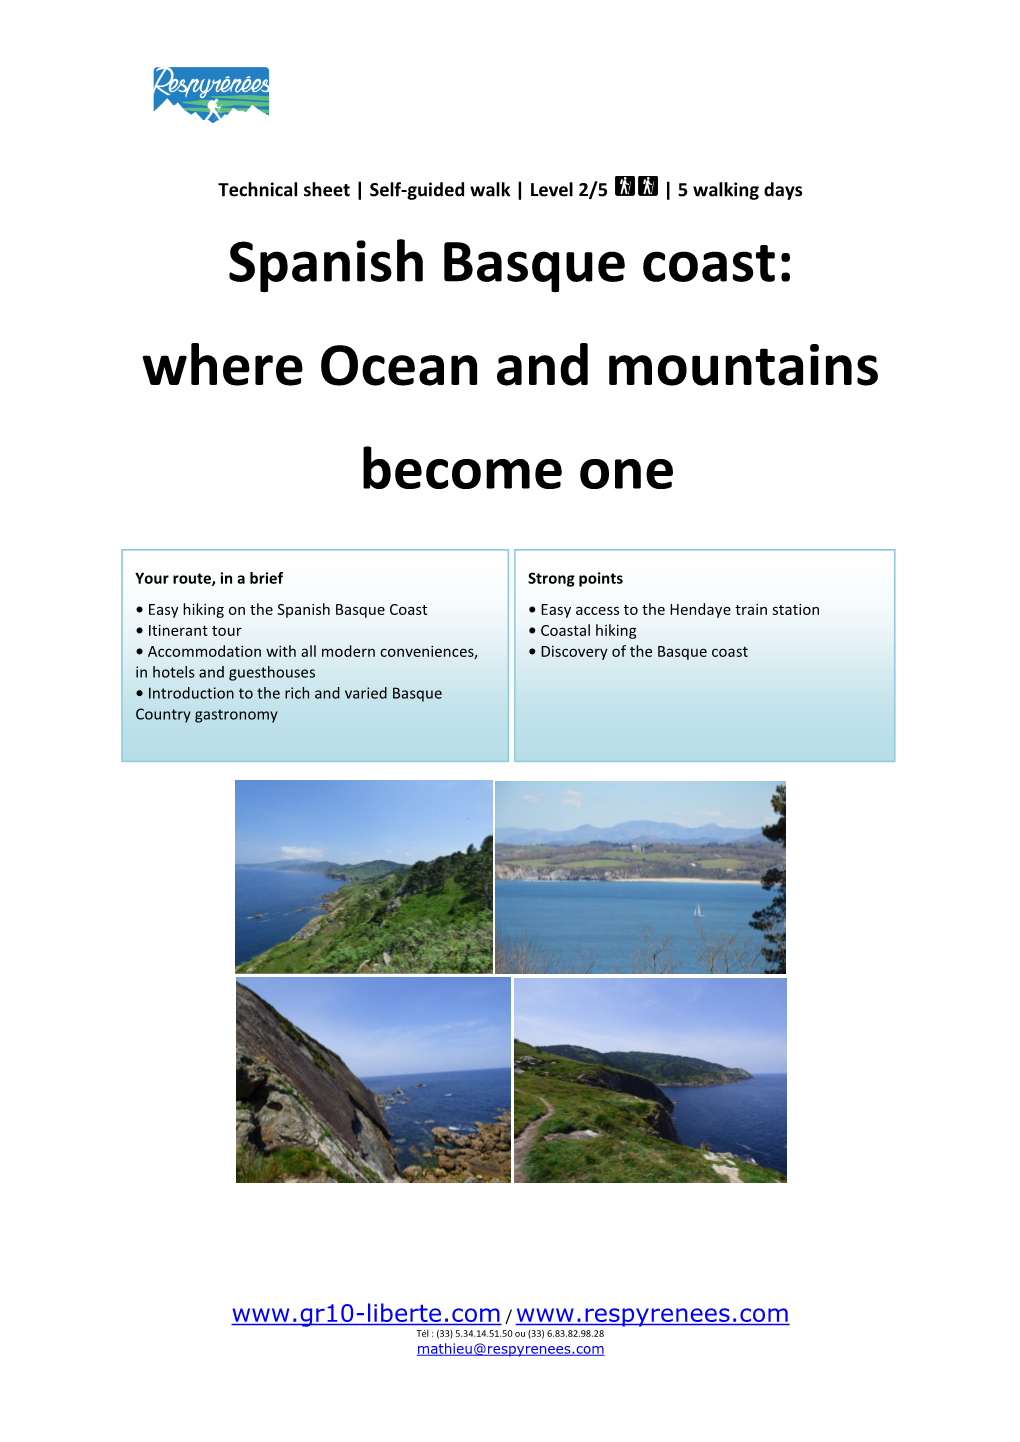 Spanish Basque Coast: Where Ocean and Mountains Become One